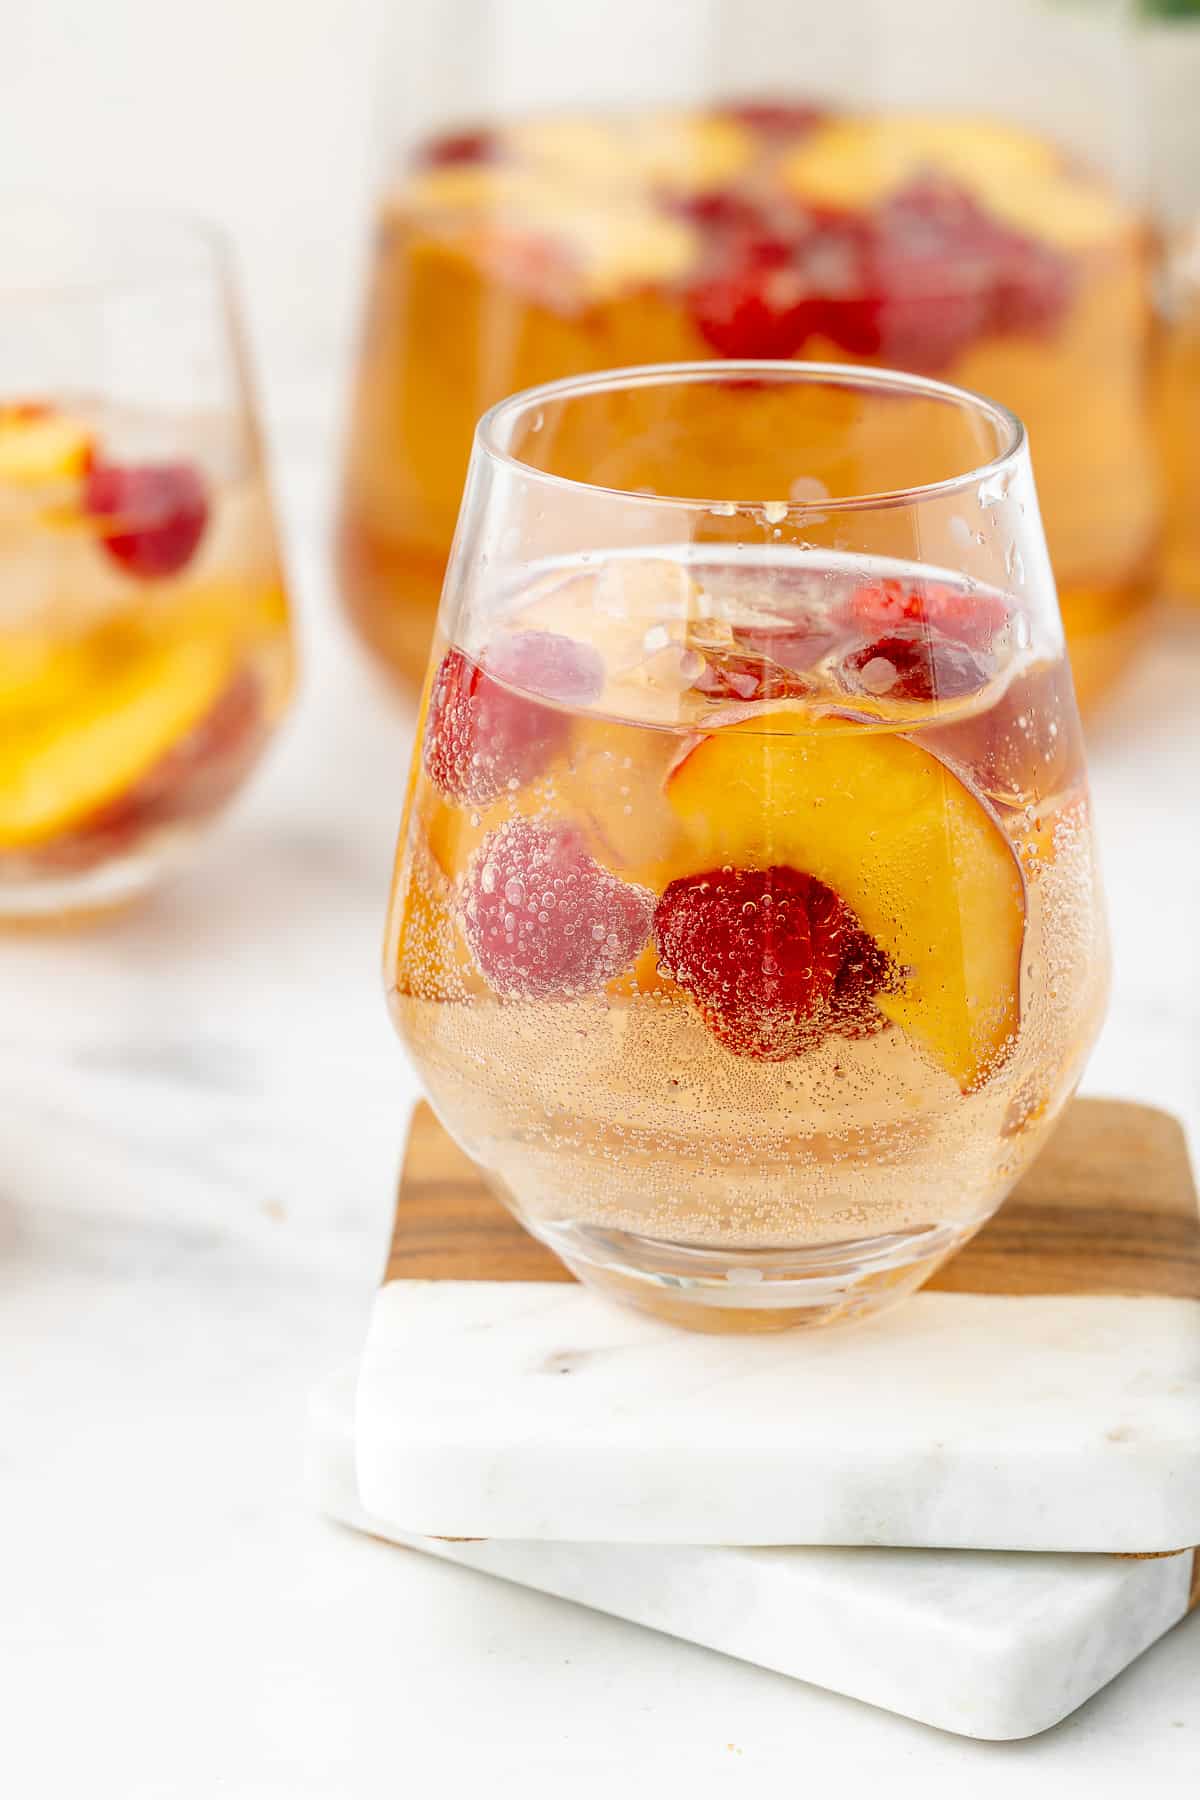 Sparkling rose sangria served in a wine glass, with a pitcher in the background.